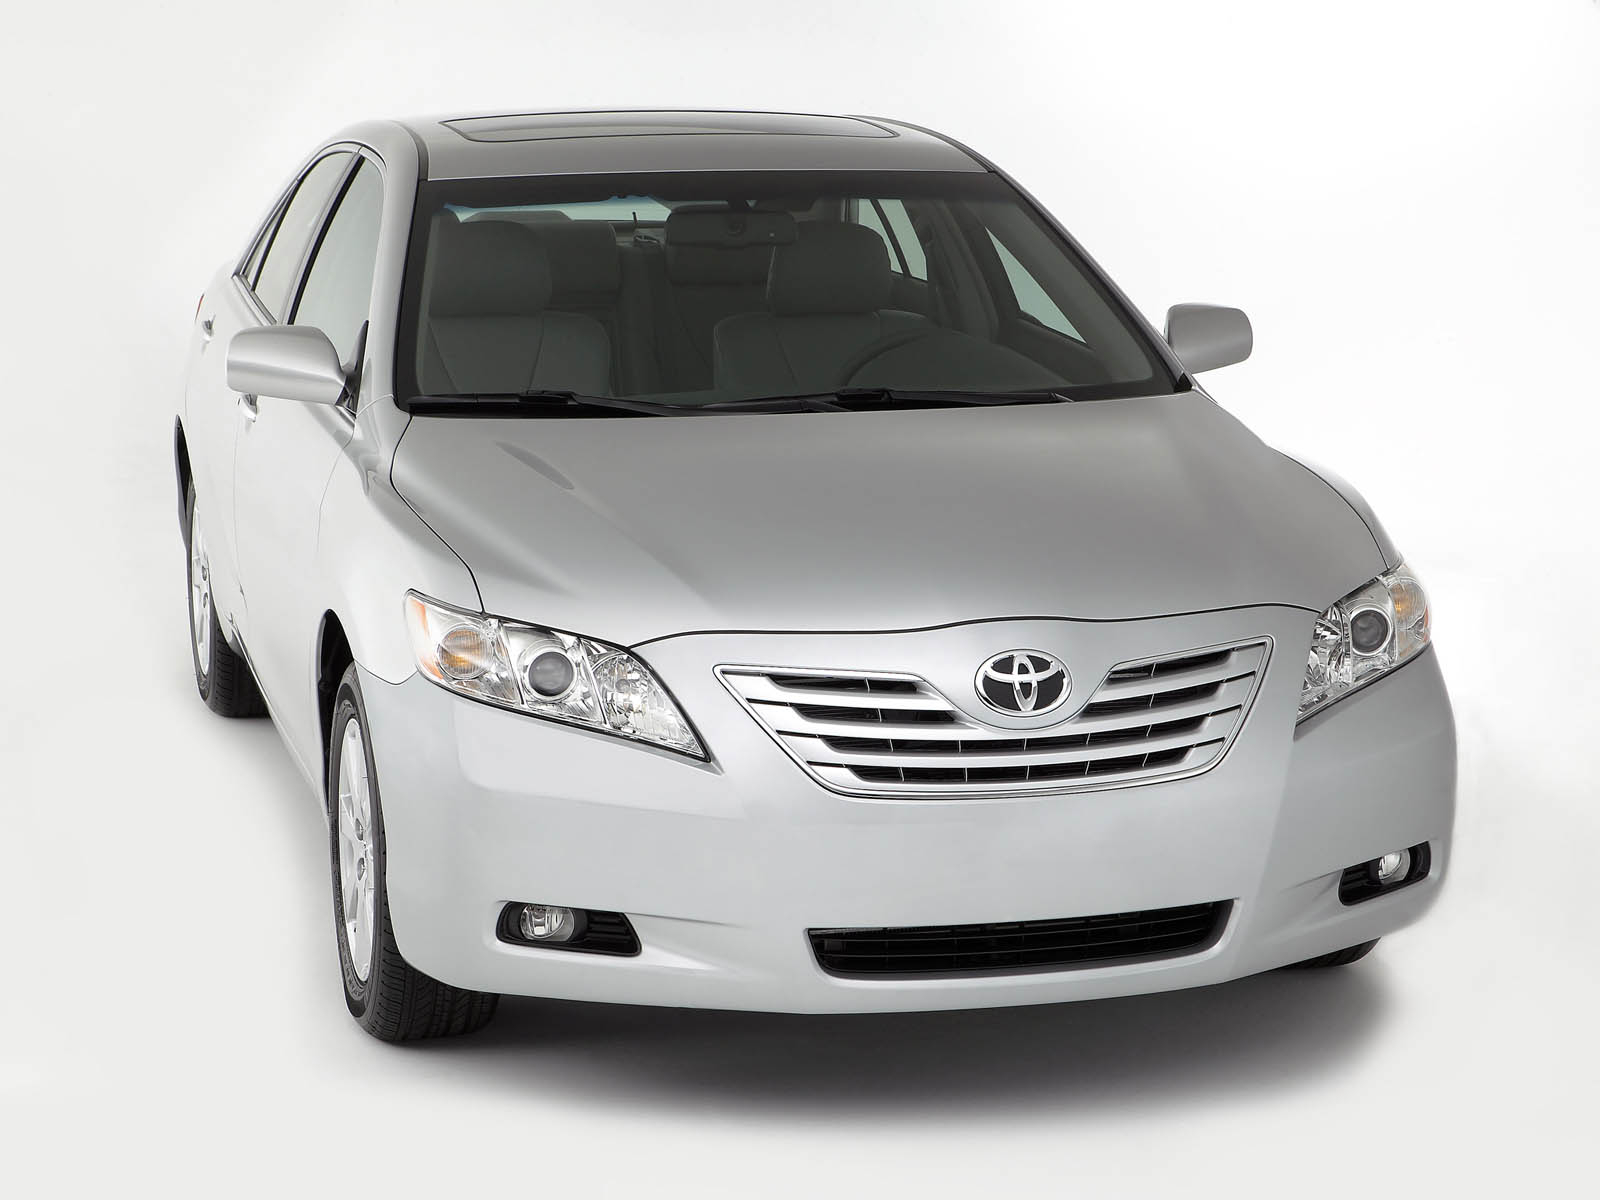 Tag: Toyota Camry Car Wallpapers, Backgrounds, Photos, Pictures,and 